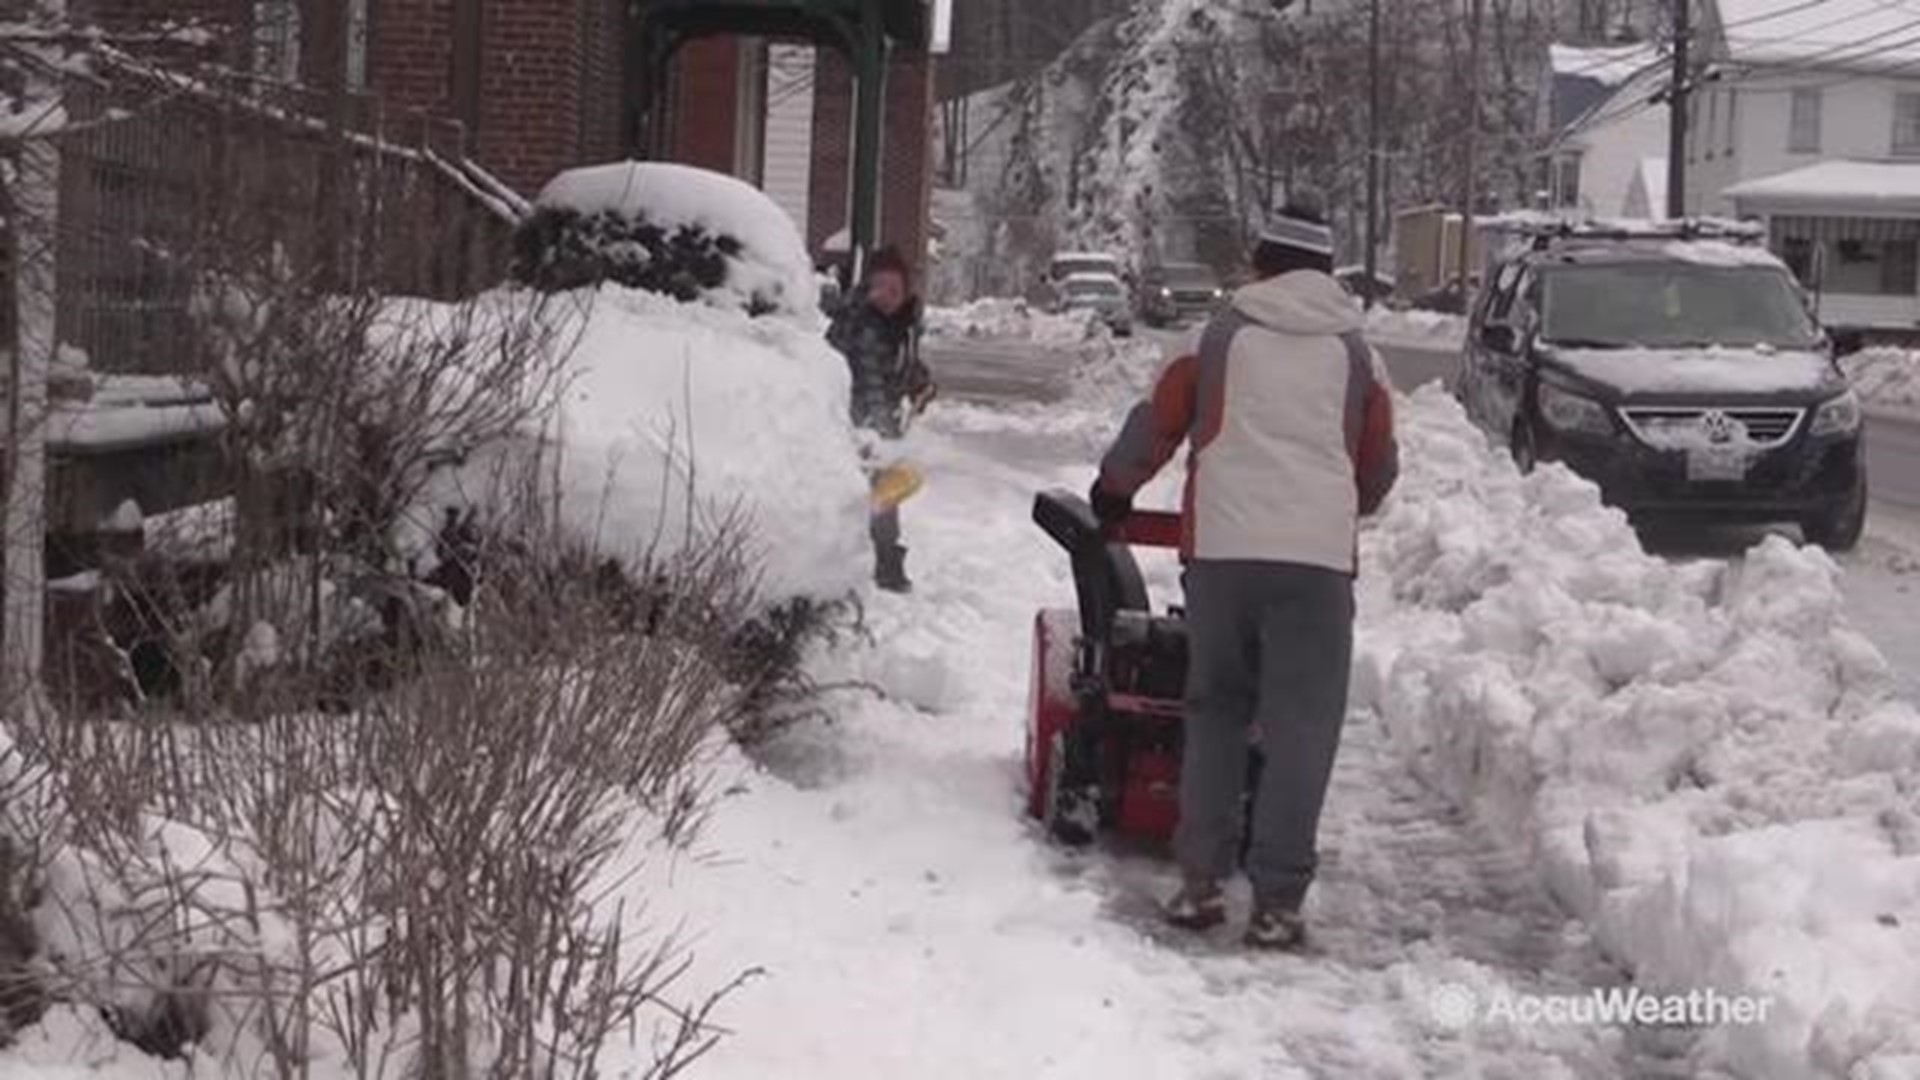 It's cleanup time in Tyrone, Pennsylvania after a winter storm left the community buried in snow.